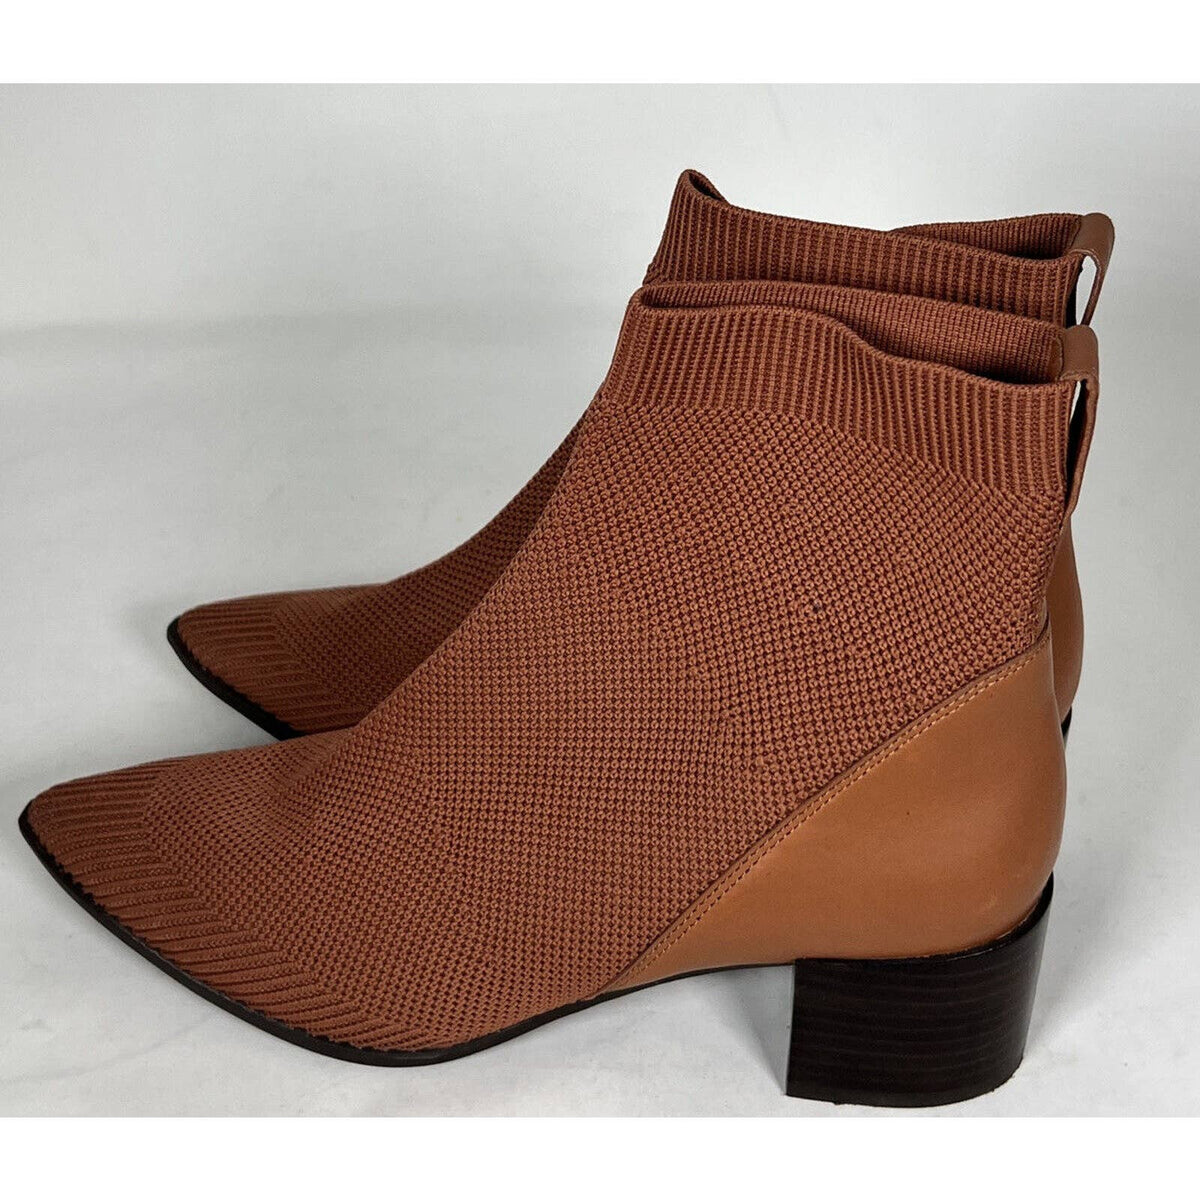 Everlane The Glove Boot Toffee Sz. 8.5